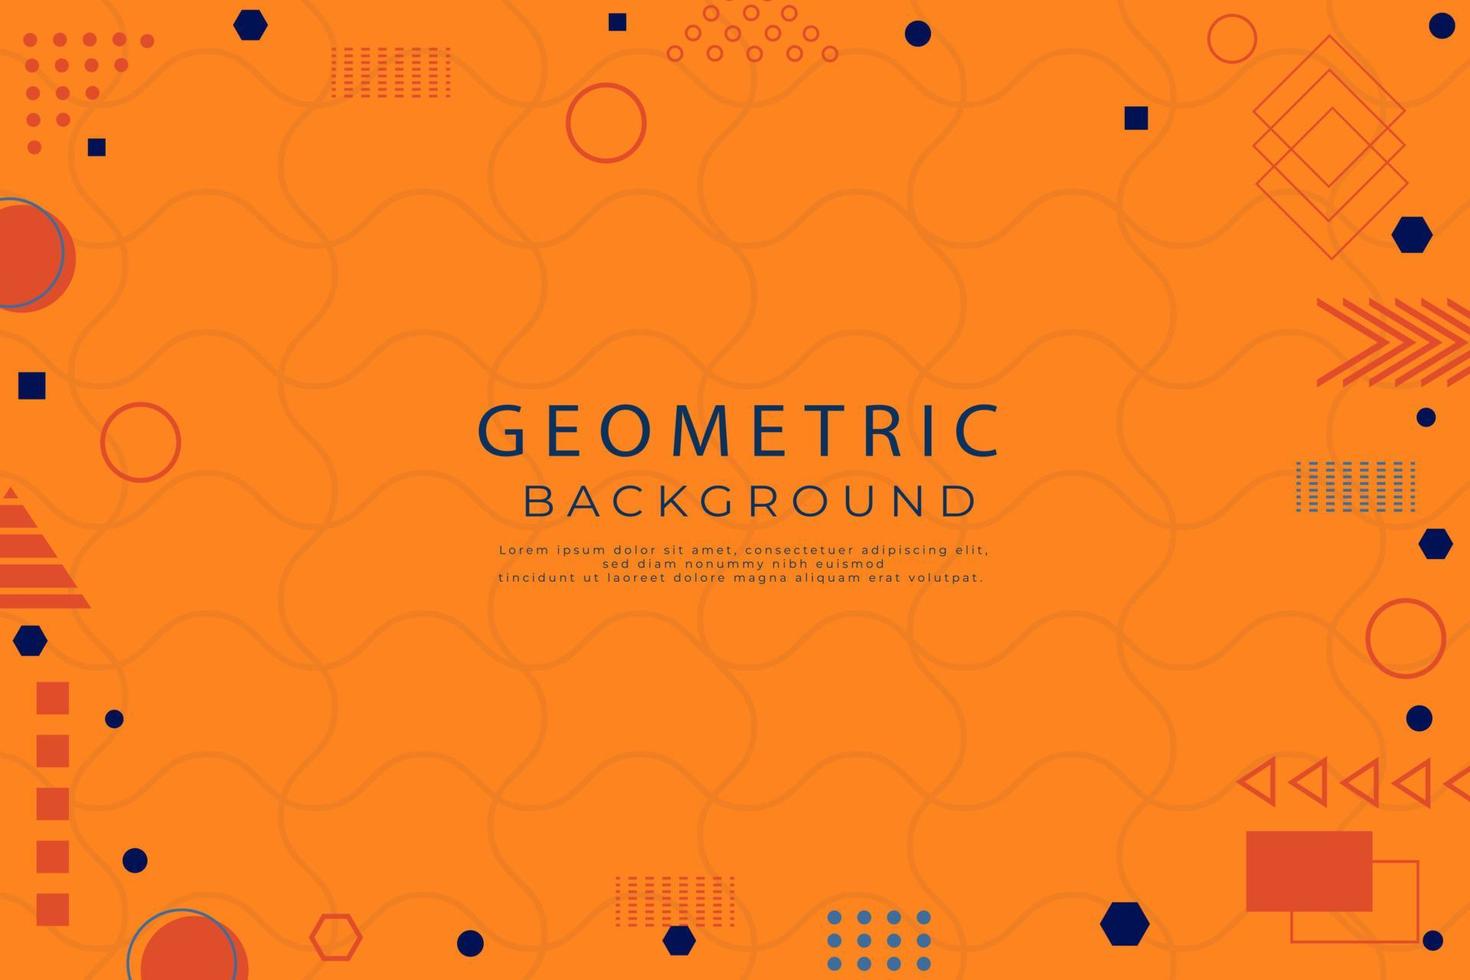 Flat geometric shapes wallpaper, various shapes and line abstract flat geometric background vector